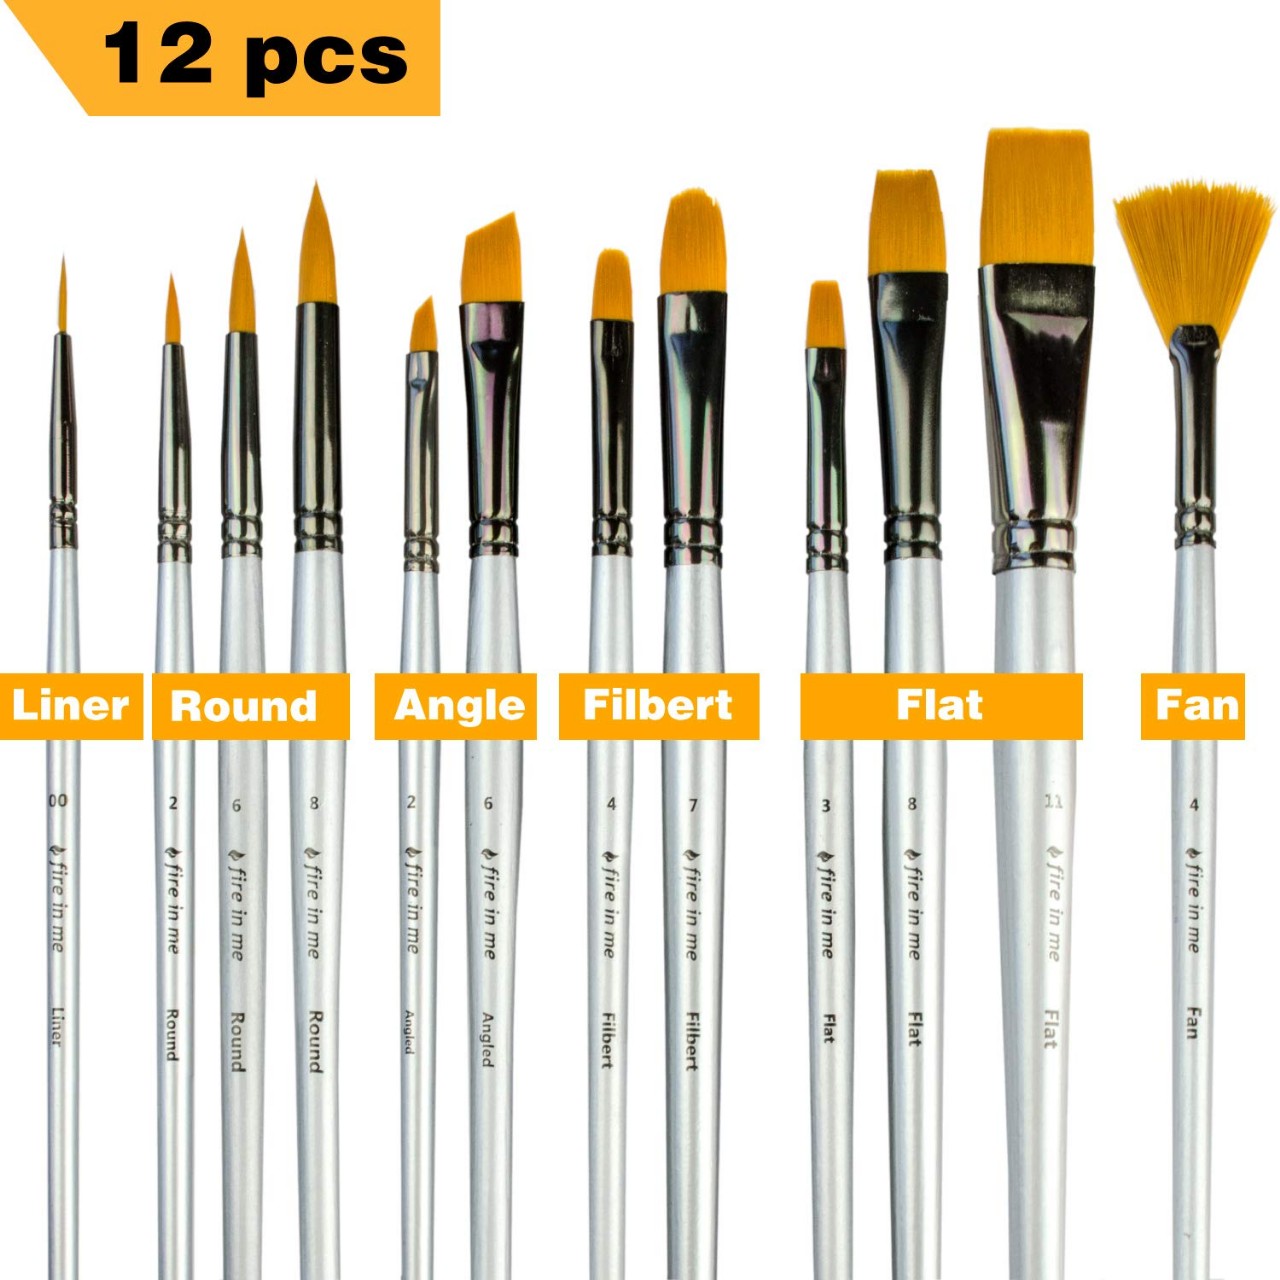 rt Paint Brushes for Acrylic Painting Watercolor Oil Gouache - Body and Face Paint Brushes. Best Pro